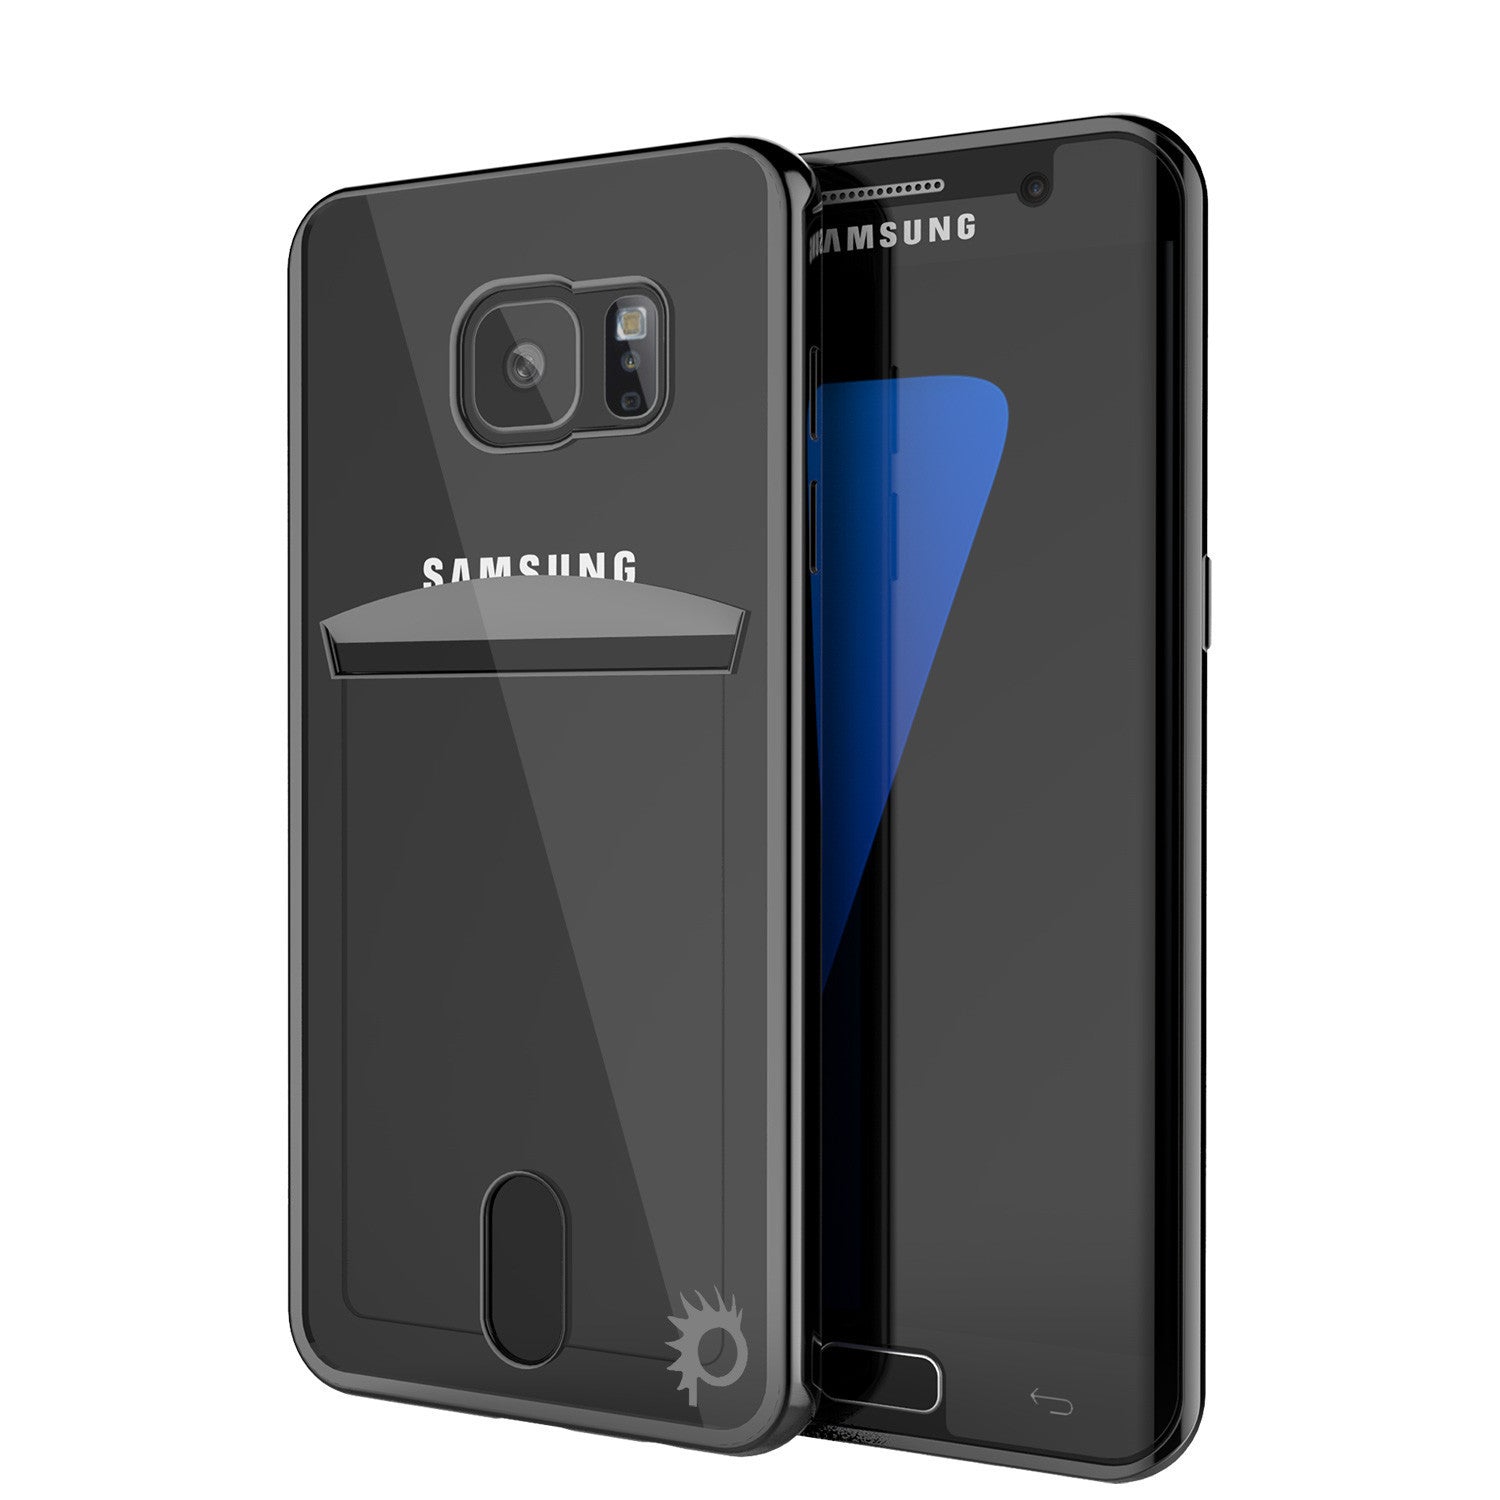 Galaxy S7 Case, PUNKCASE® LUCID Black Series | Card Slot | SHIELD Screen Protector | Ultra fit (Color in image: Balck)